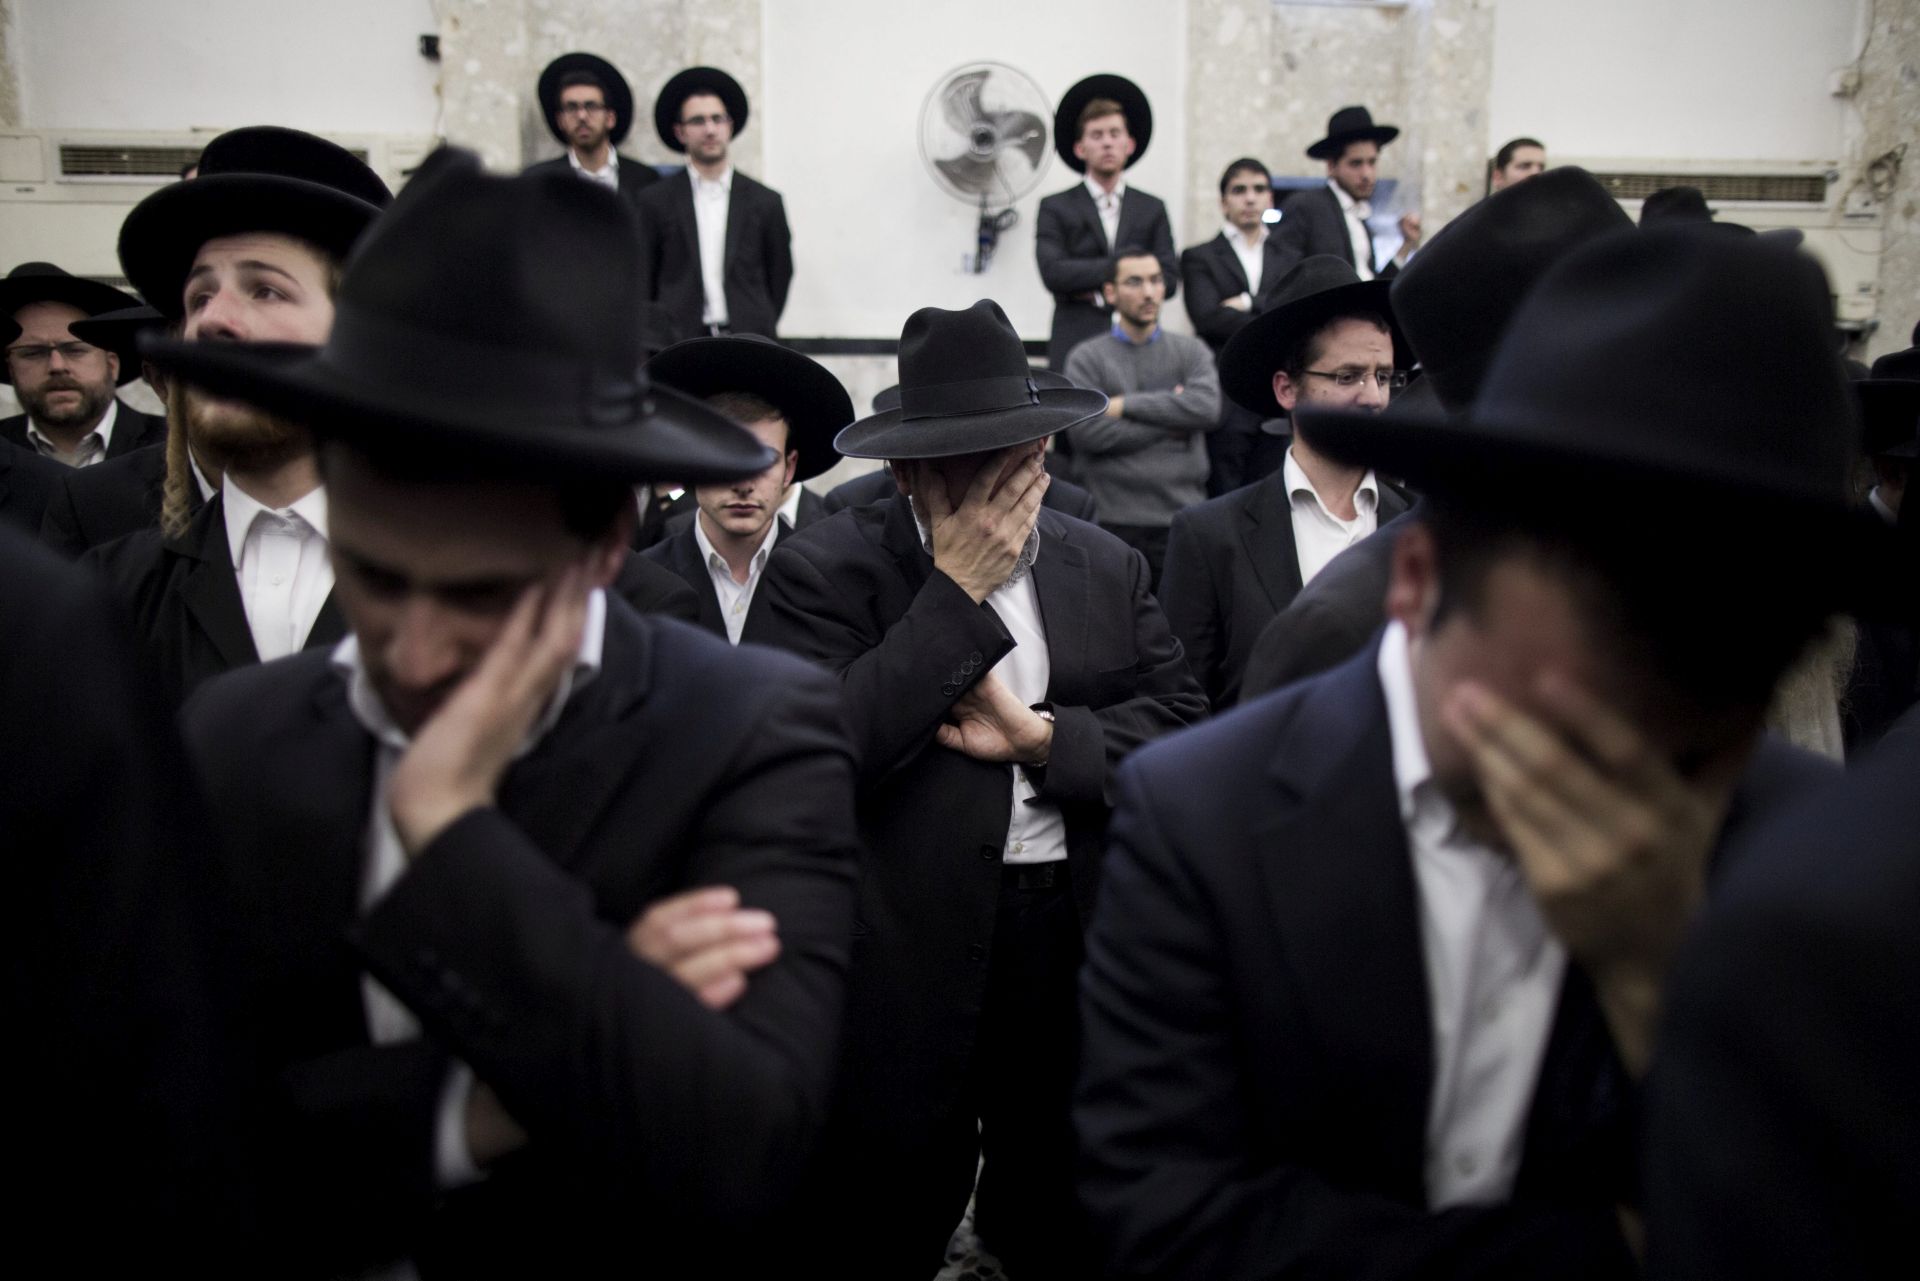 epa04494451 Ultra-Orthodox Jews mourn during a eulogy ceremony ahed of the funeral of Rabbi Moshe Twersky in a religious Neighborhood of Jerusalem, 18 November 2014. Rabbi Twersky is one of the four jewish victims who were killed when two Palestinian men from East Jerusalem entered a synagogue with weapons and attacked worshippers, killing four Israelis and injuring some 10 others.  EPA/ABIR SULTAN